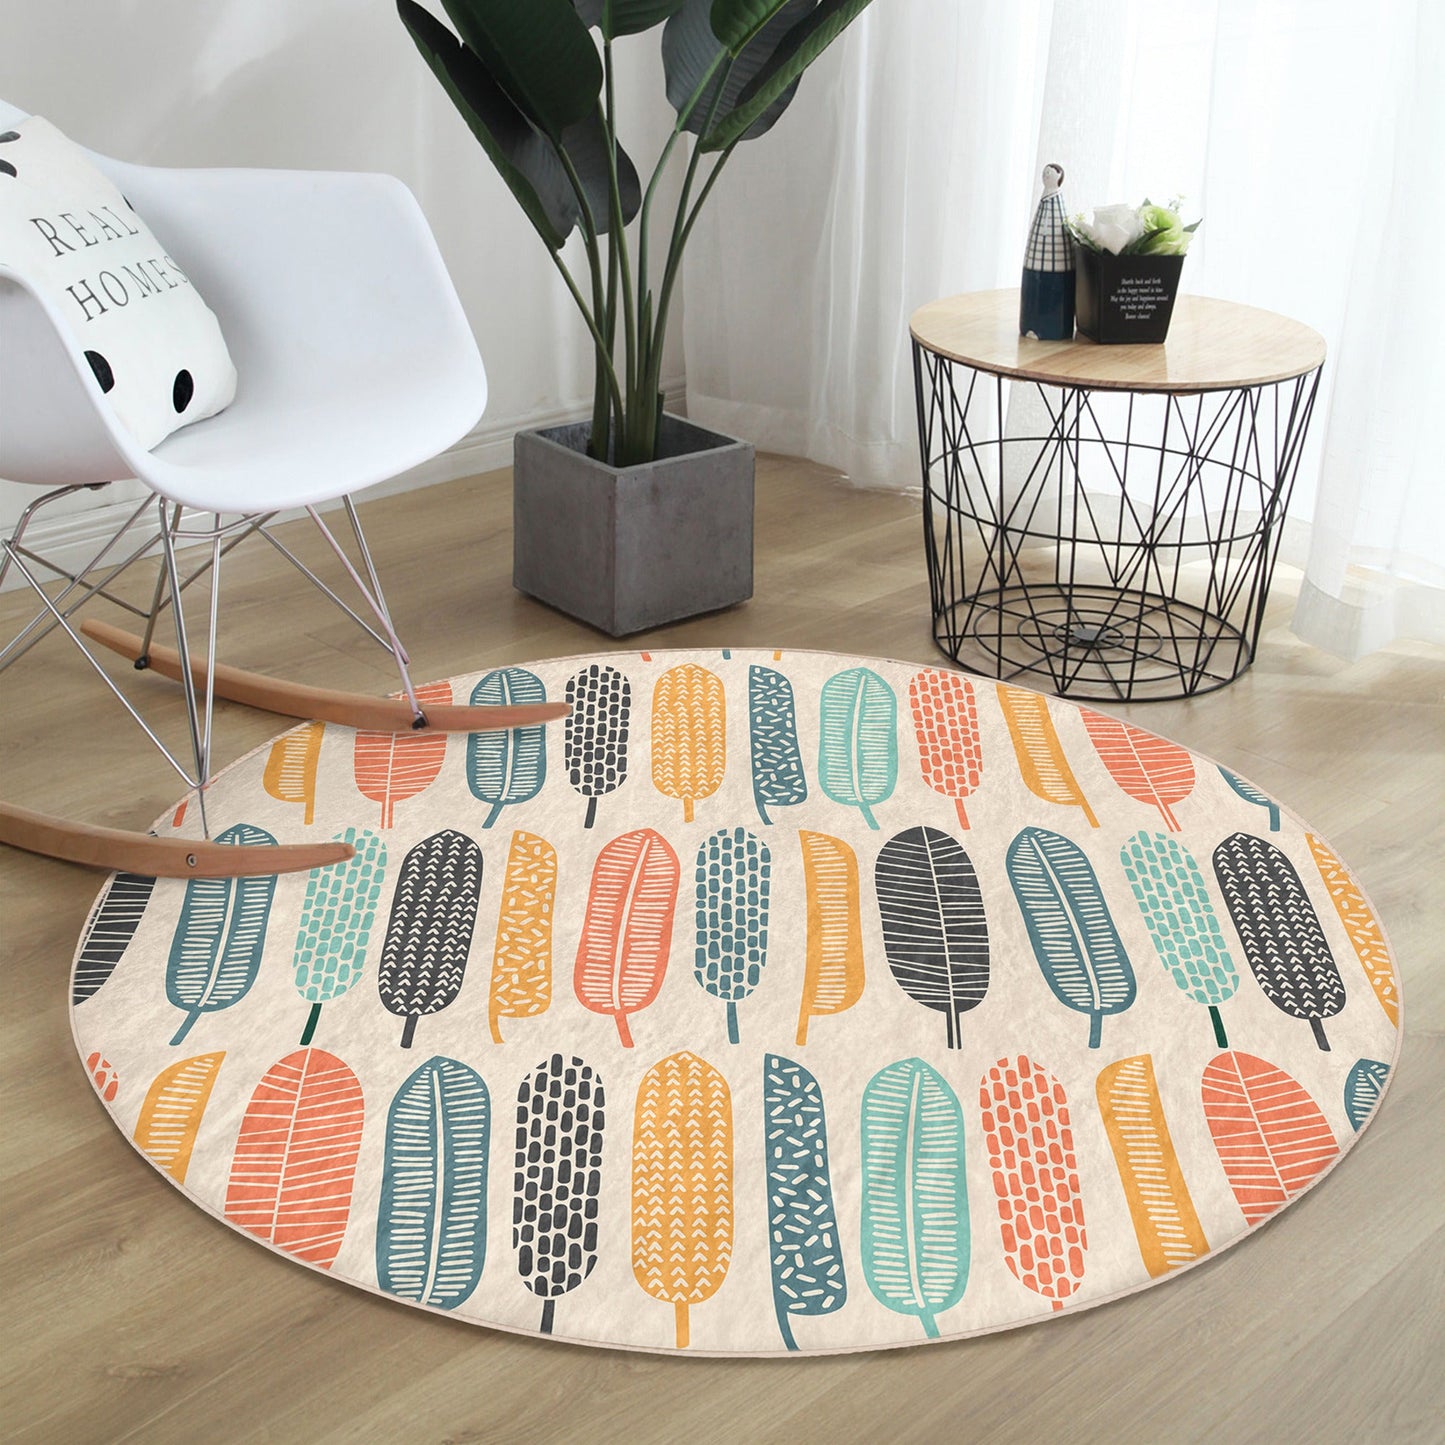 Abstract Decorative Round Rug, Bedroom Area Rug, Fur Patterned Living